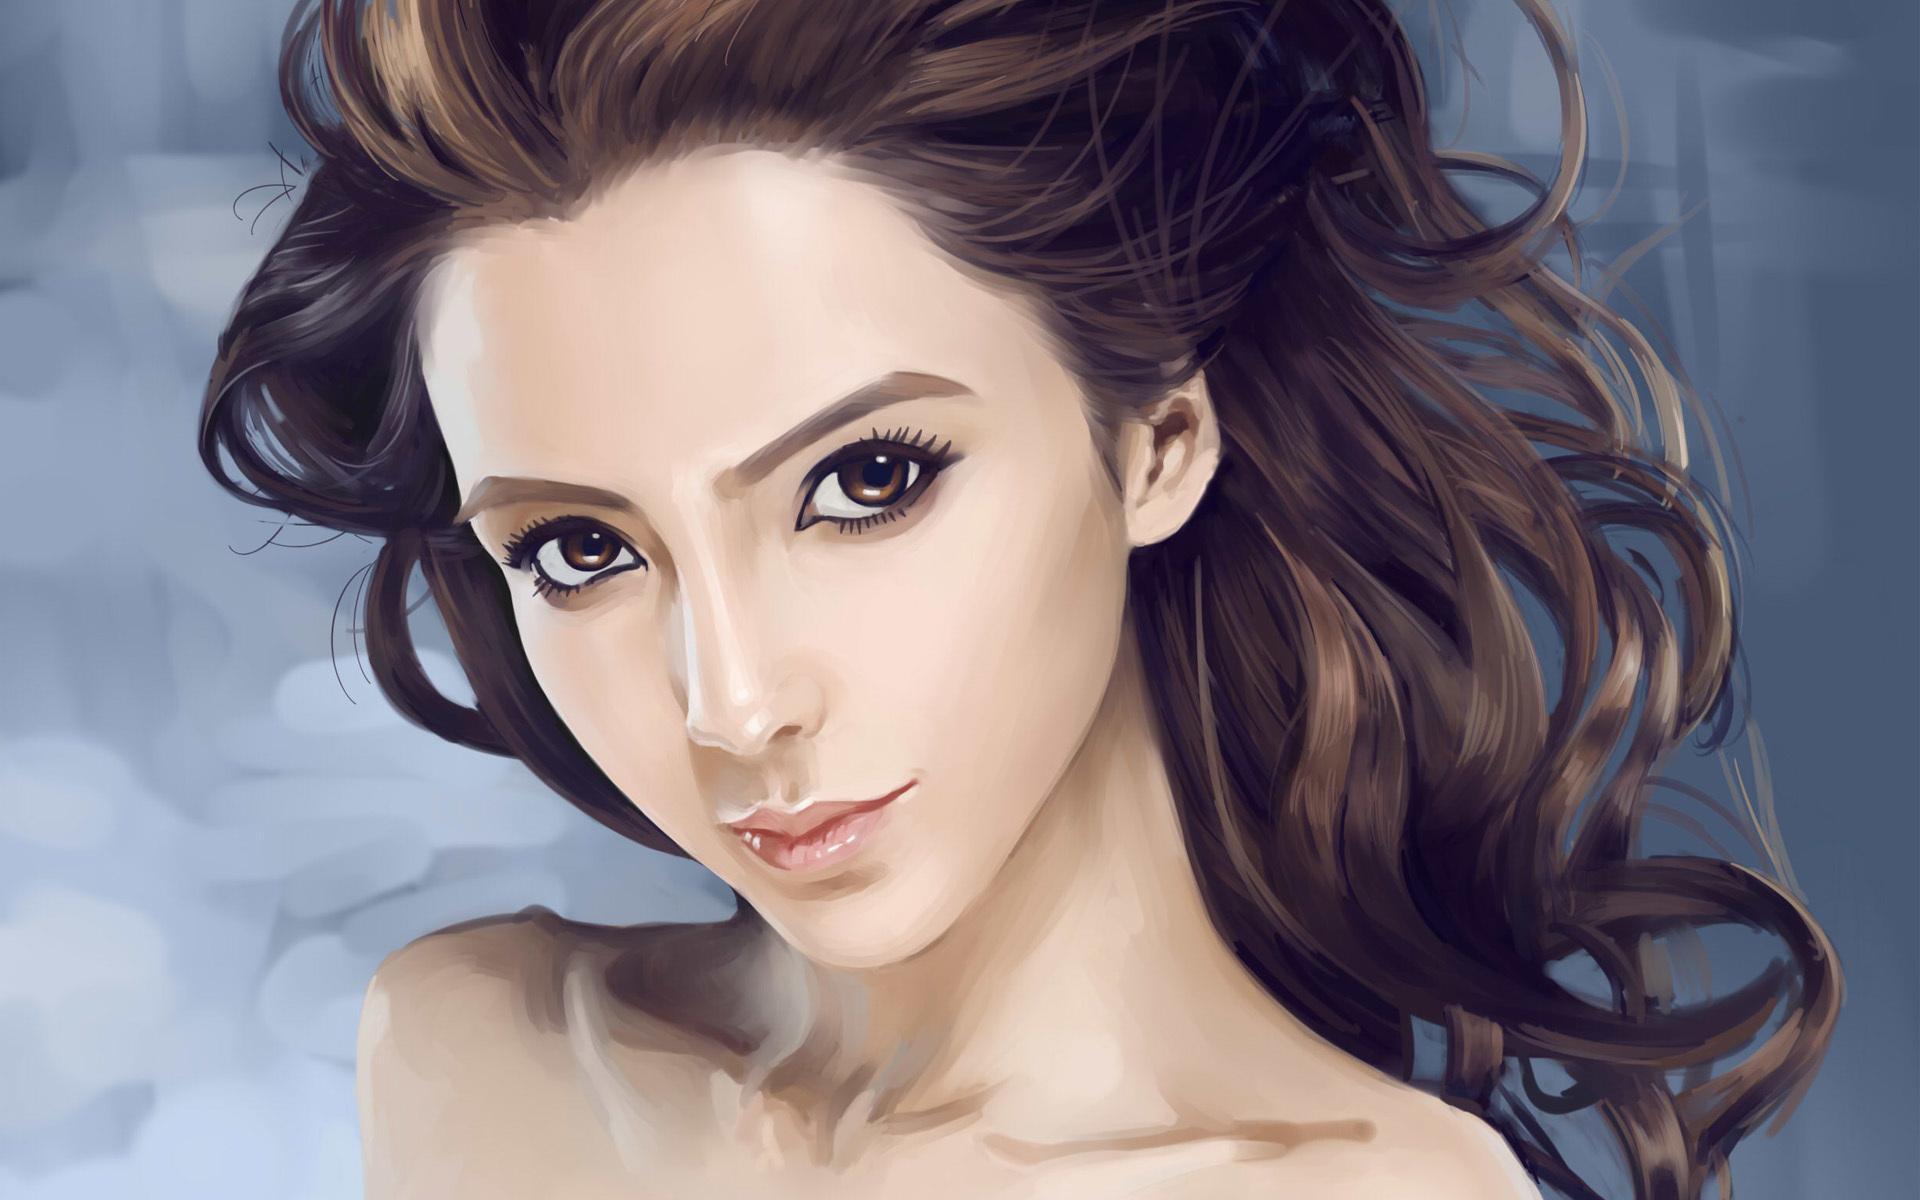 Pretty Face In 3D Wallpaper 1920x1200 px Free Download